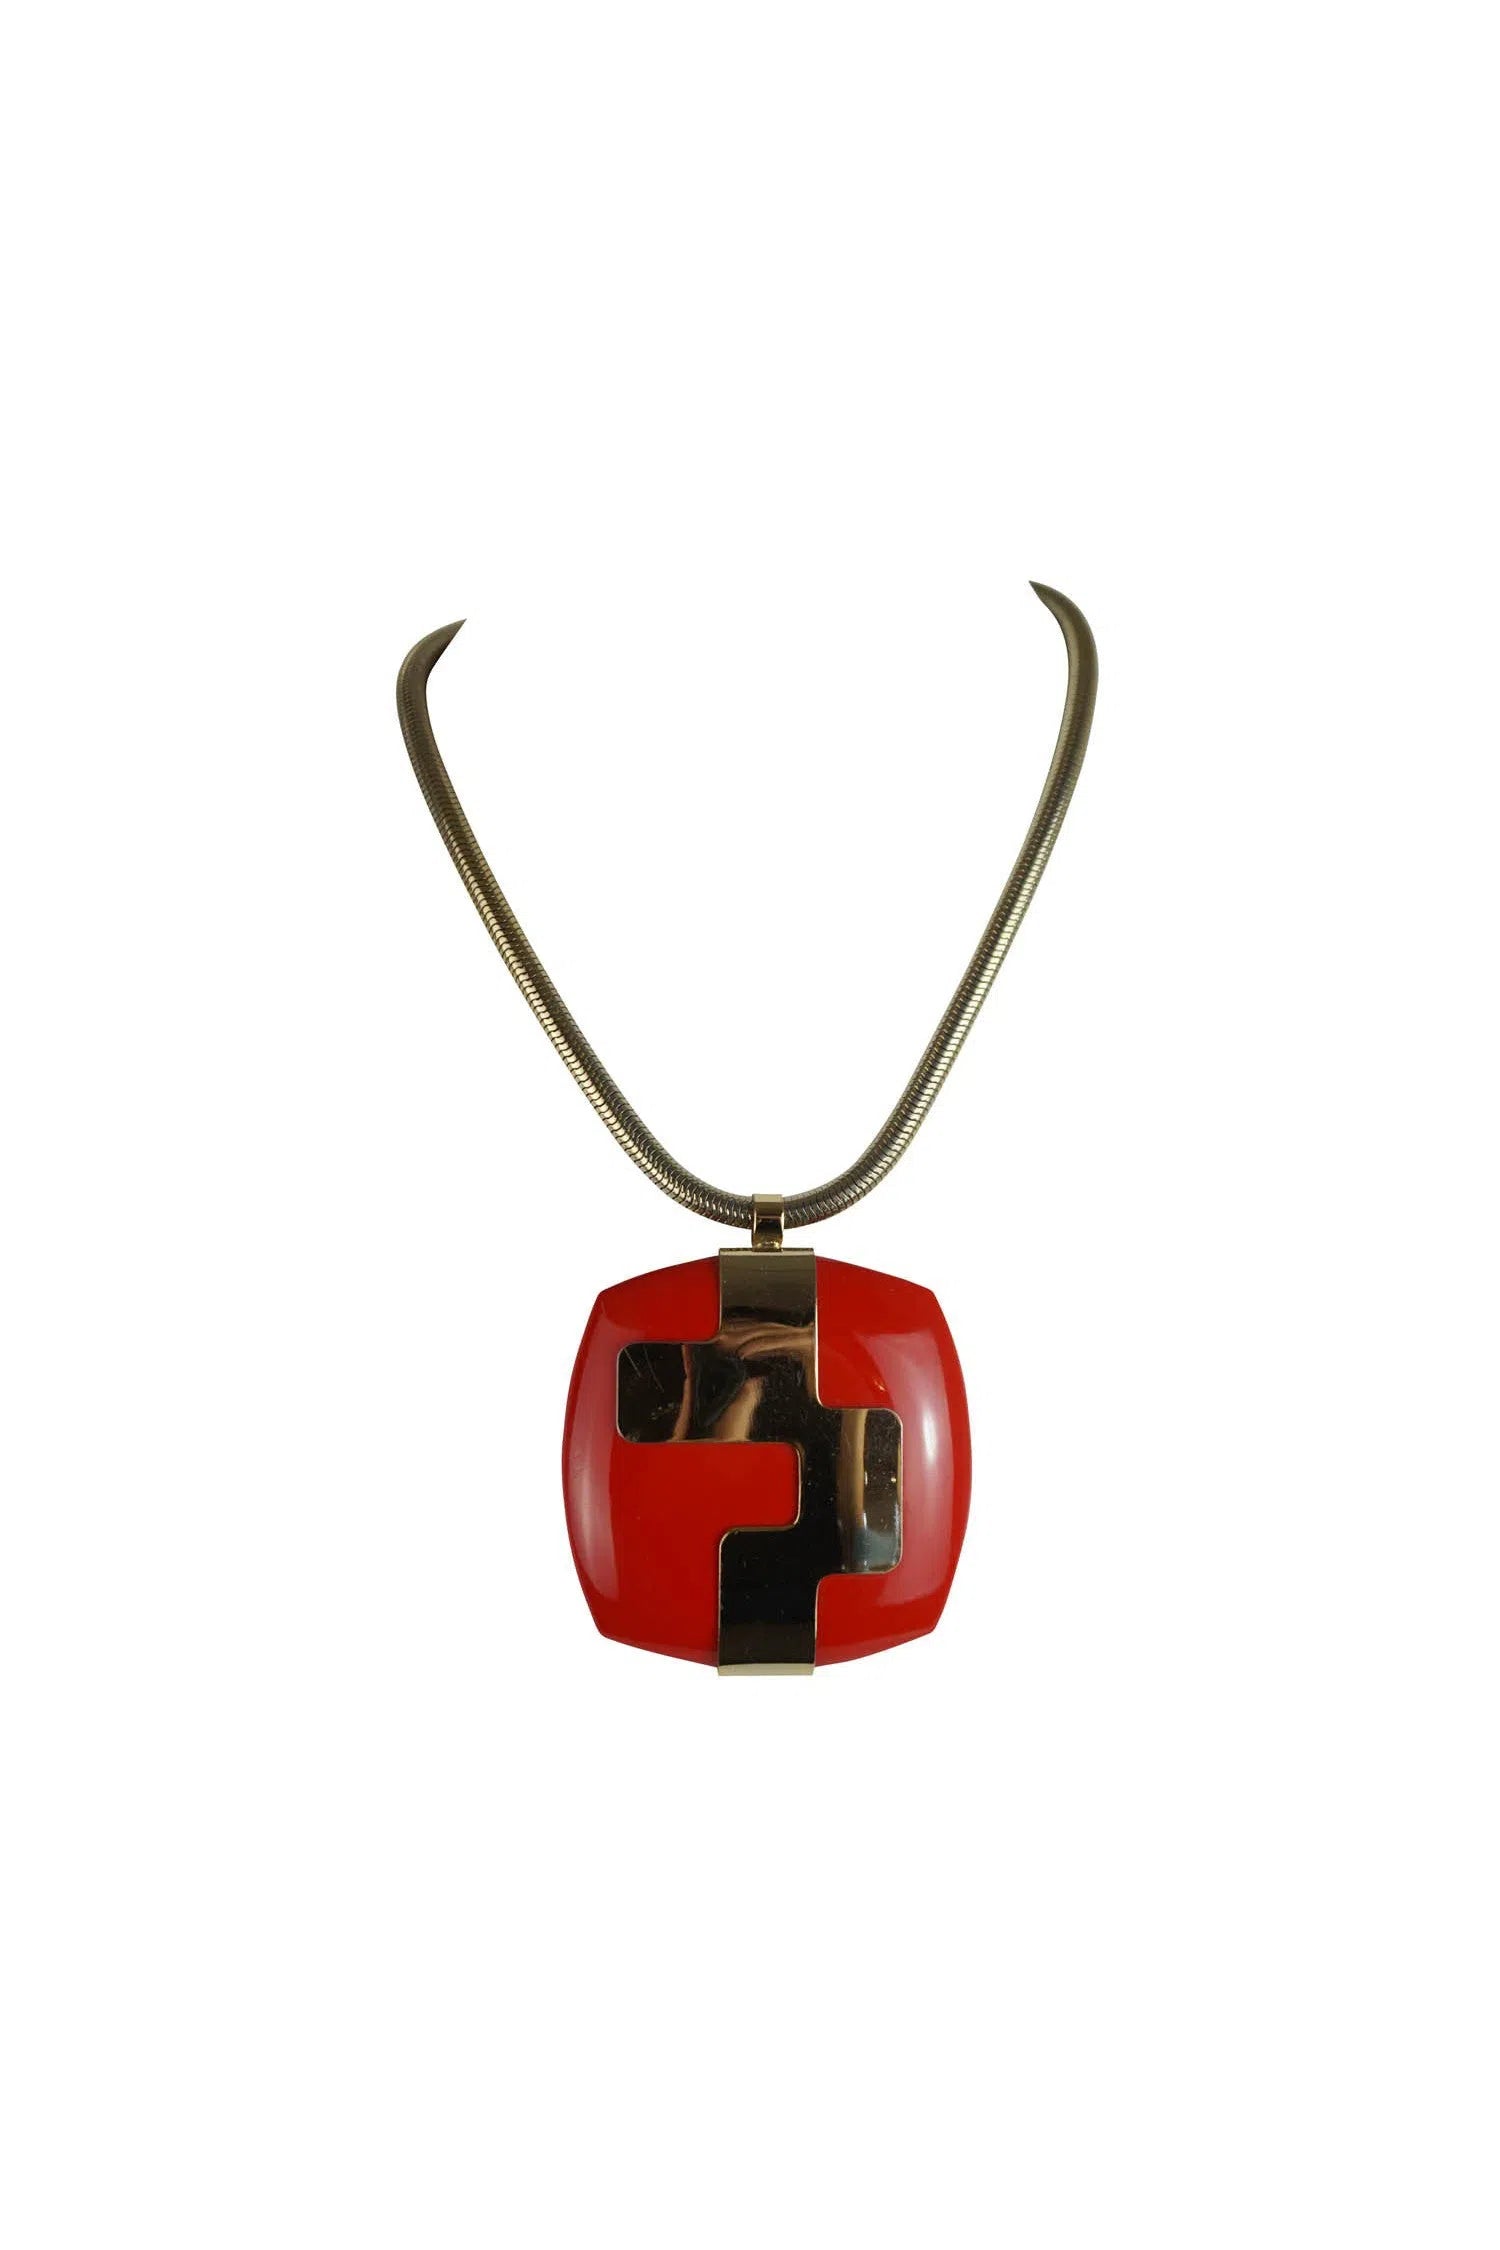 Lanvin Vintage Red and Gold Mod Necklace 1960's - Foxy Couture Carmel